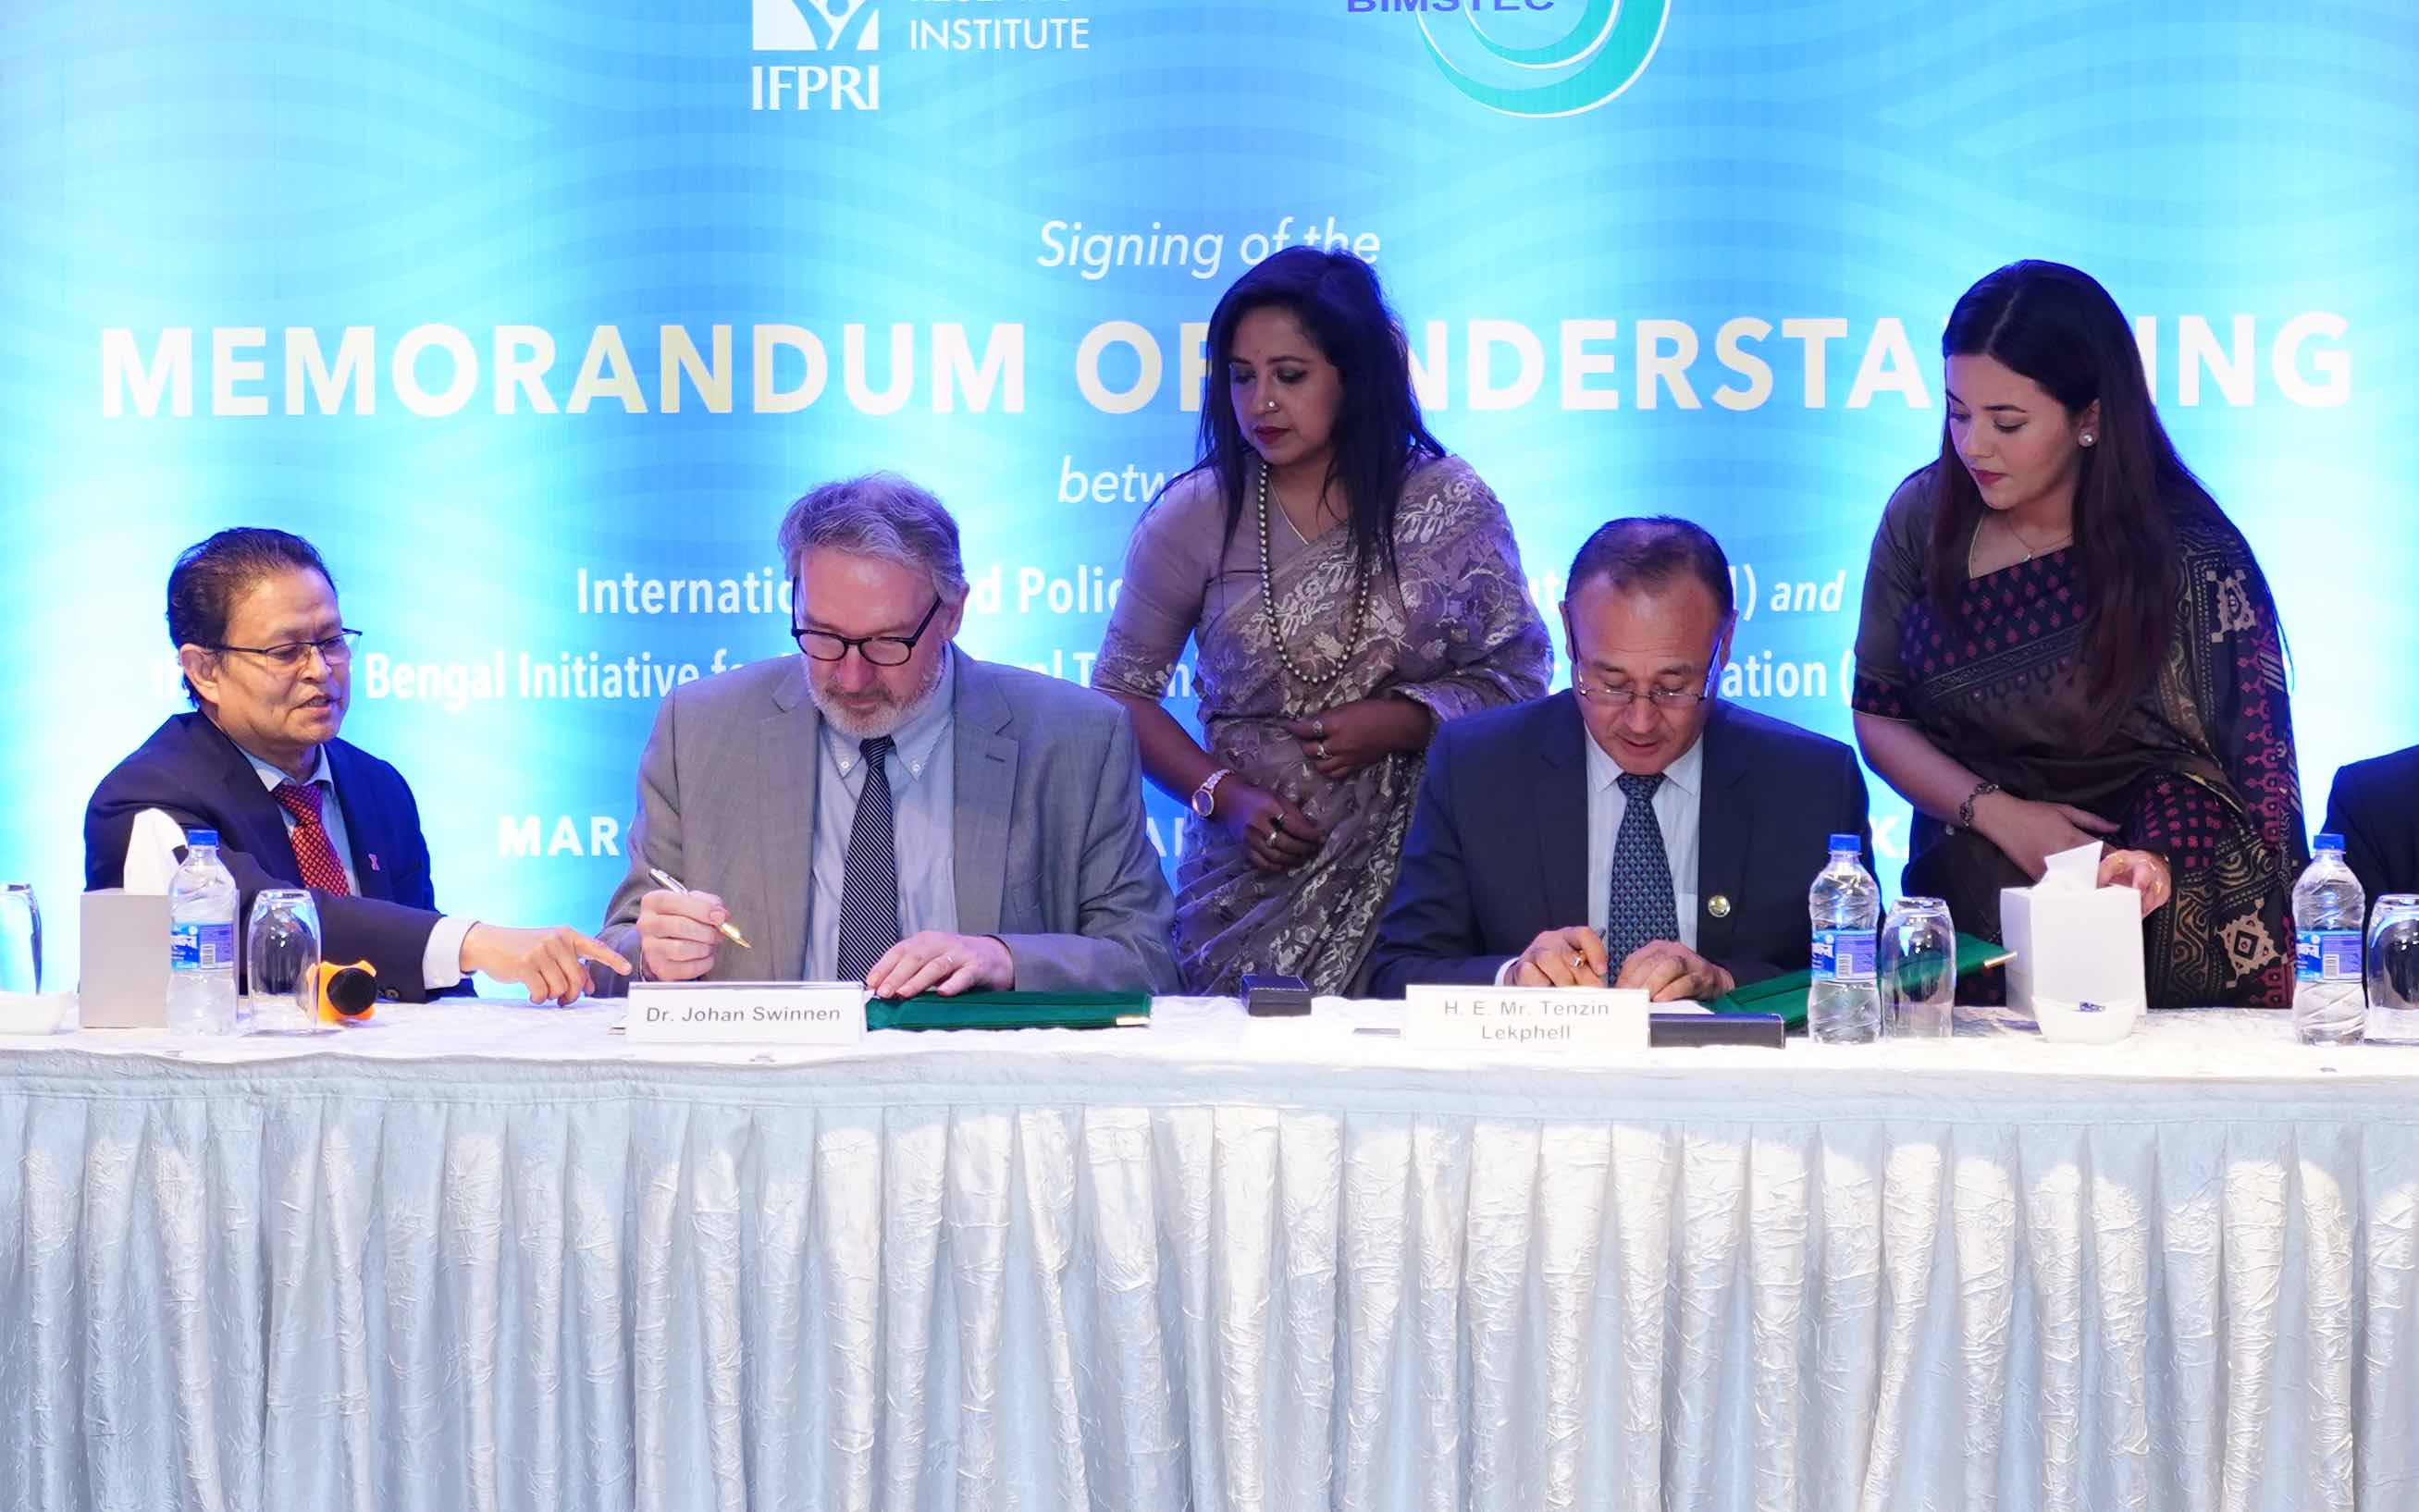 IFPRI-BIMSTEC MoU signing: Transforming agrifood systems in the Bay of Bengal region